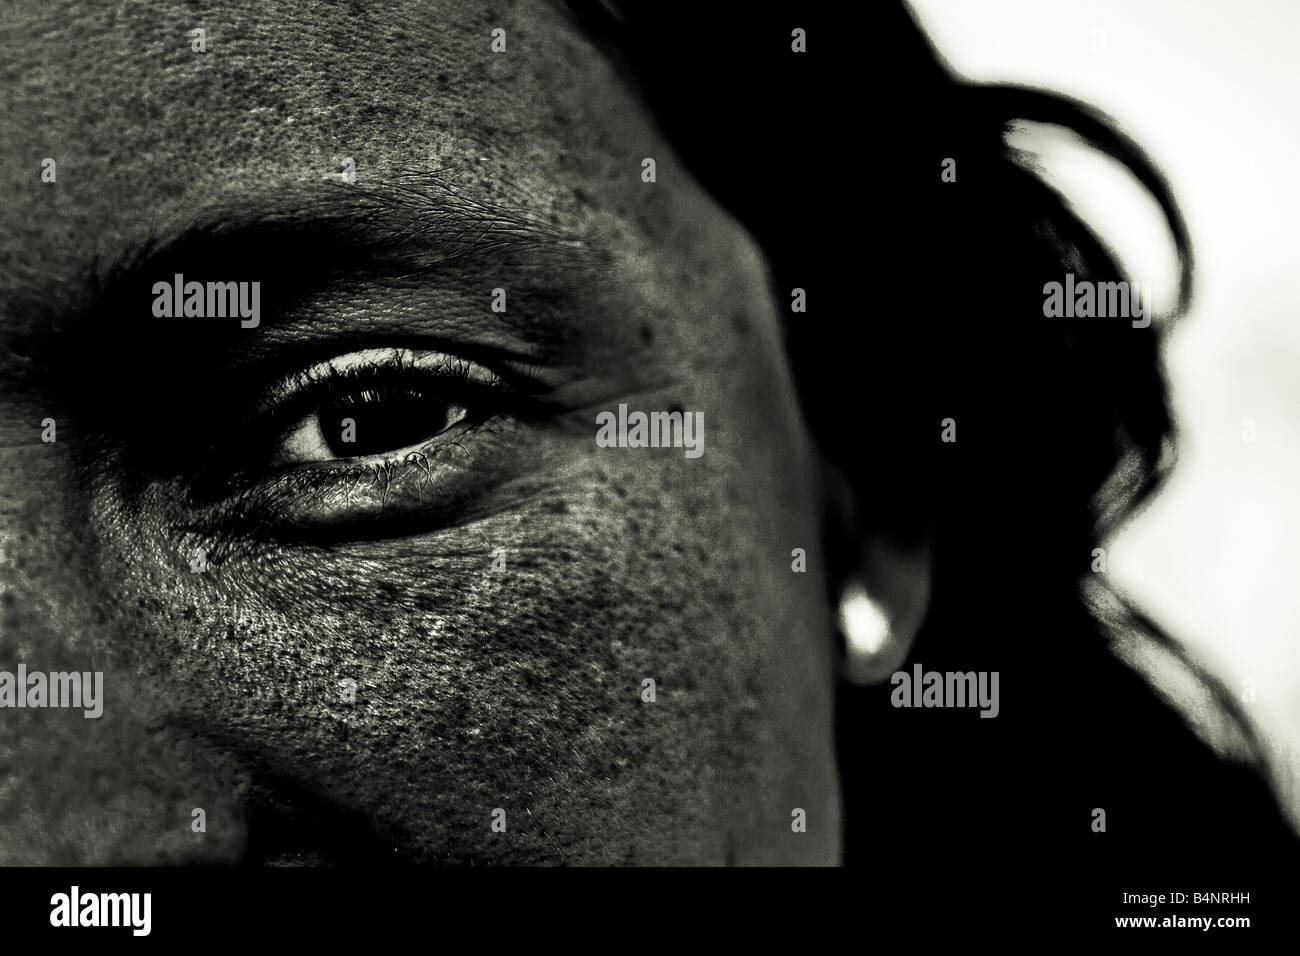 Black eye in black face staring at you Stock Photo